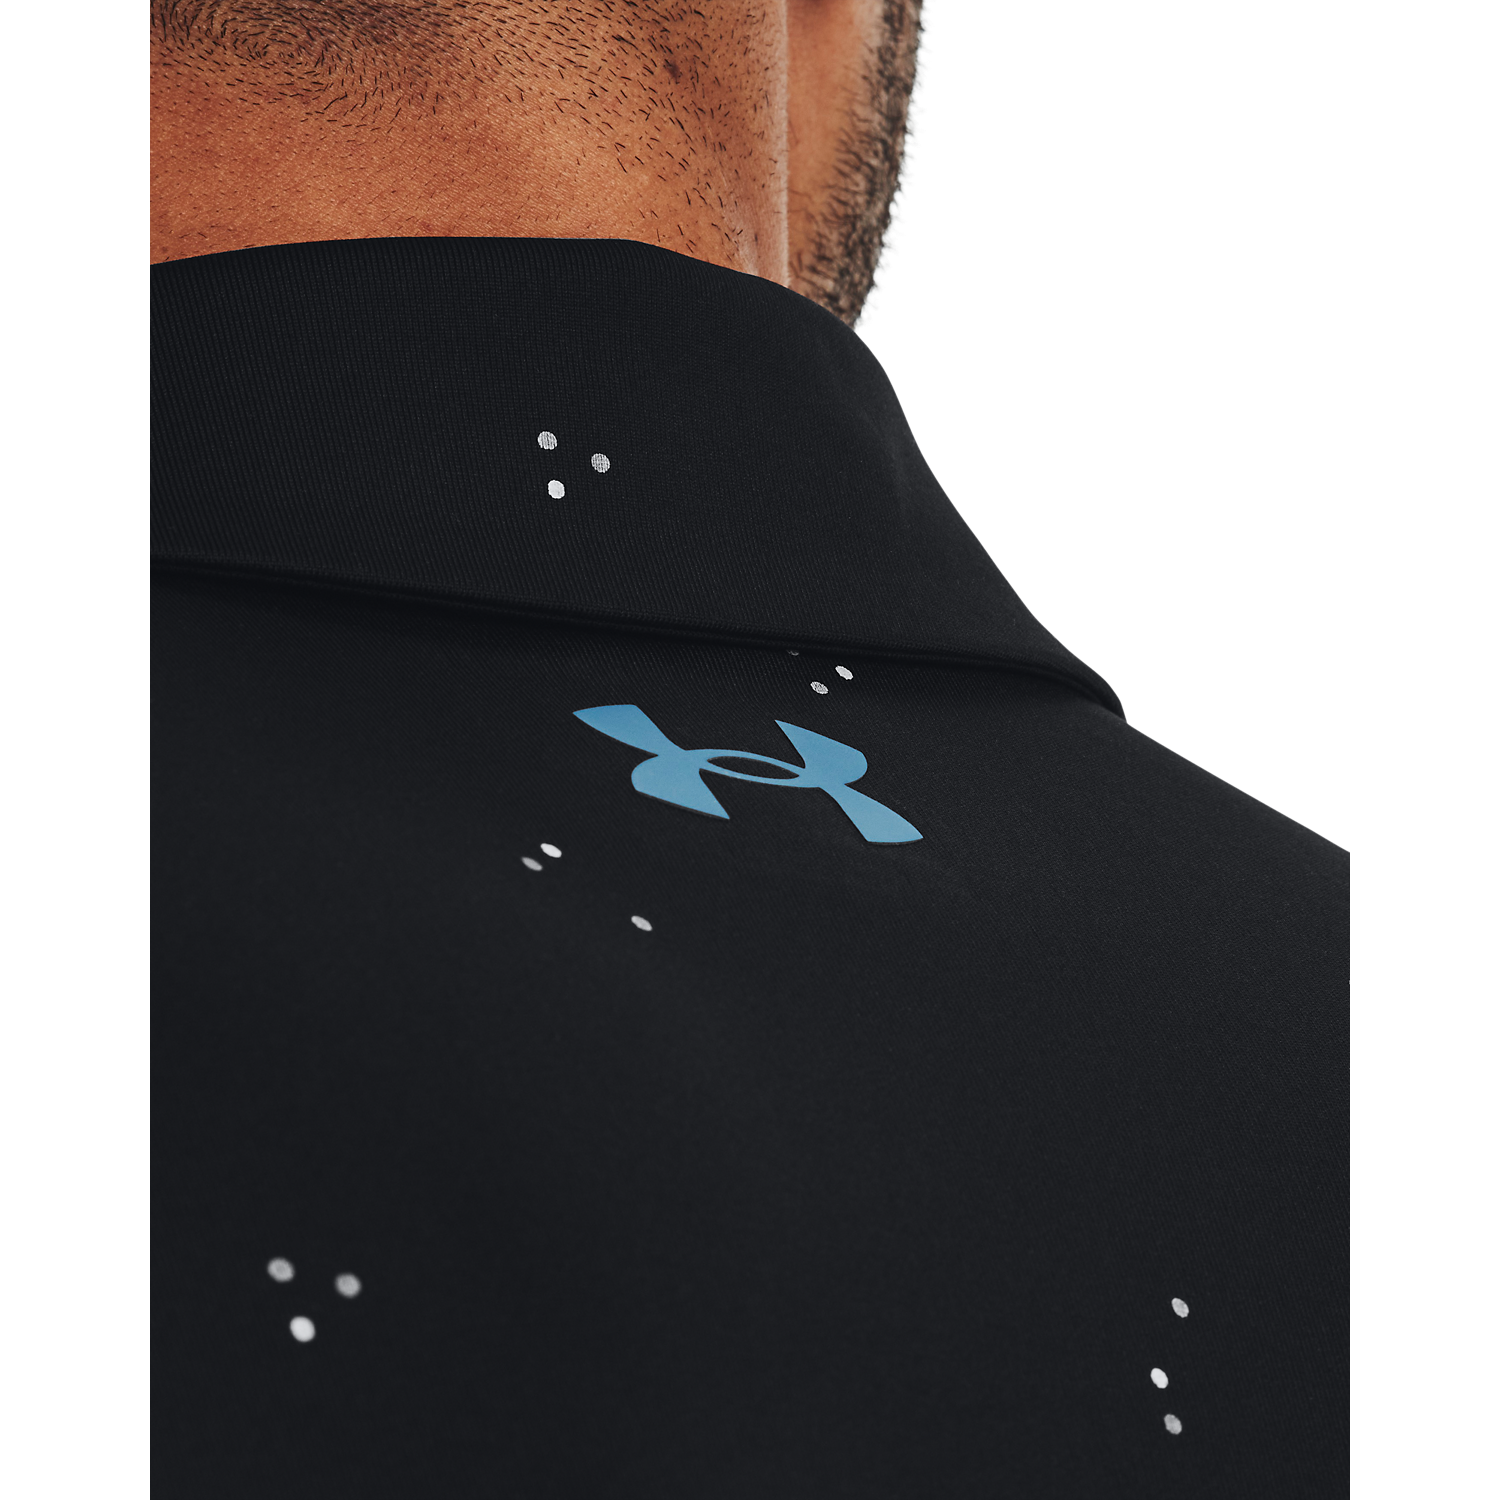 Under Armour Playoff 3.0 Printed Polo Black